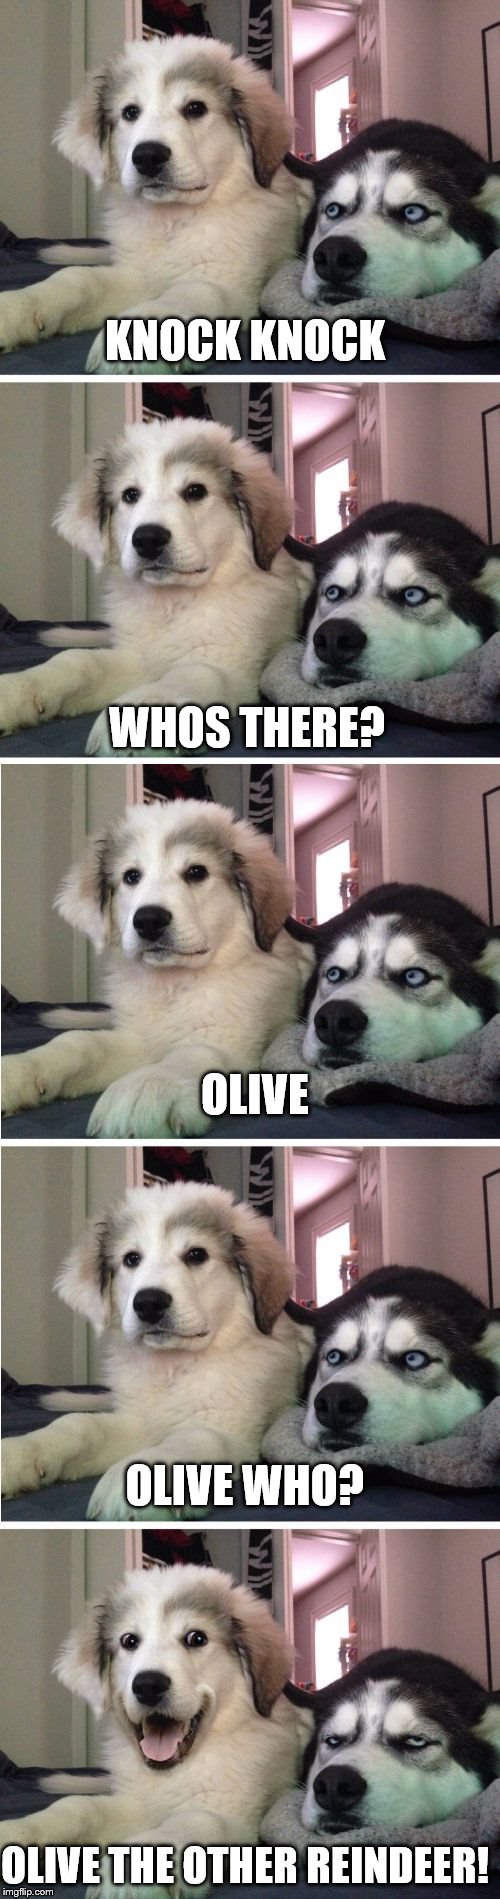 Knock Knock Dogs | KNOCK KNOCK; WHOS THERE? OLIVE; OLIVE WHO? OLIVE THE OTHER REINDEER! | image tagged in knock knock dogs | made w/ Imgflip meme maker